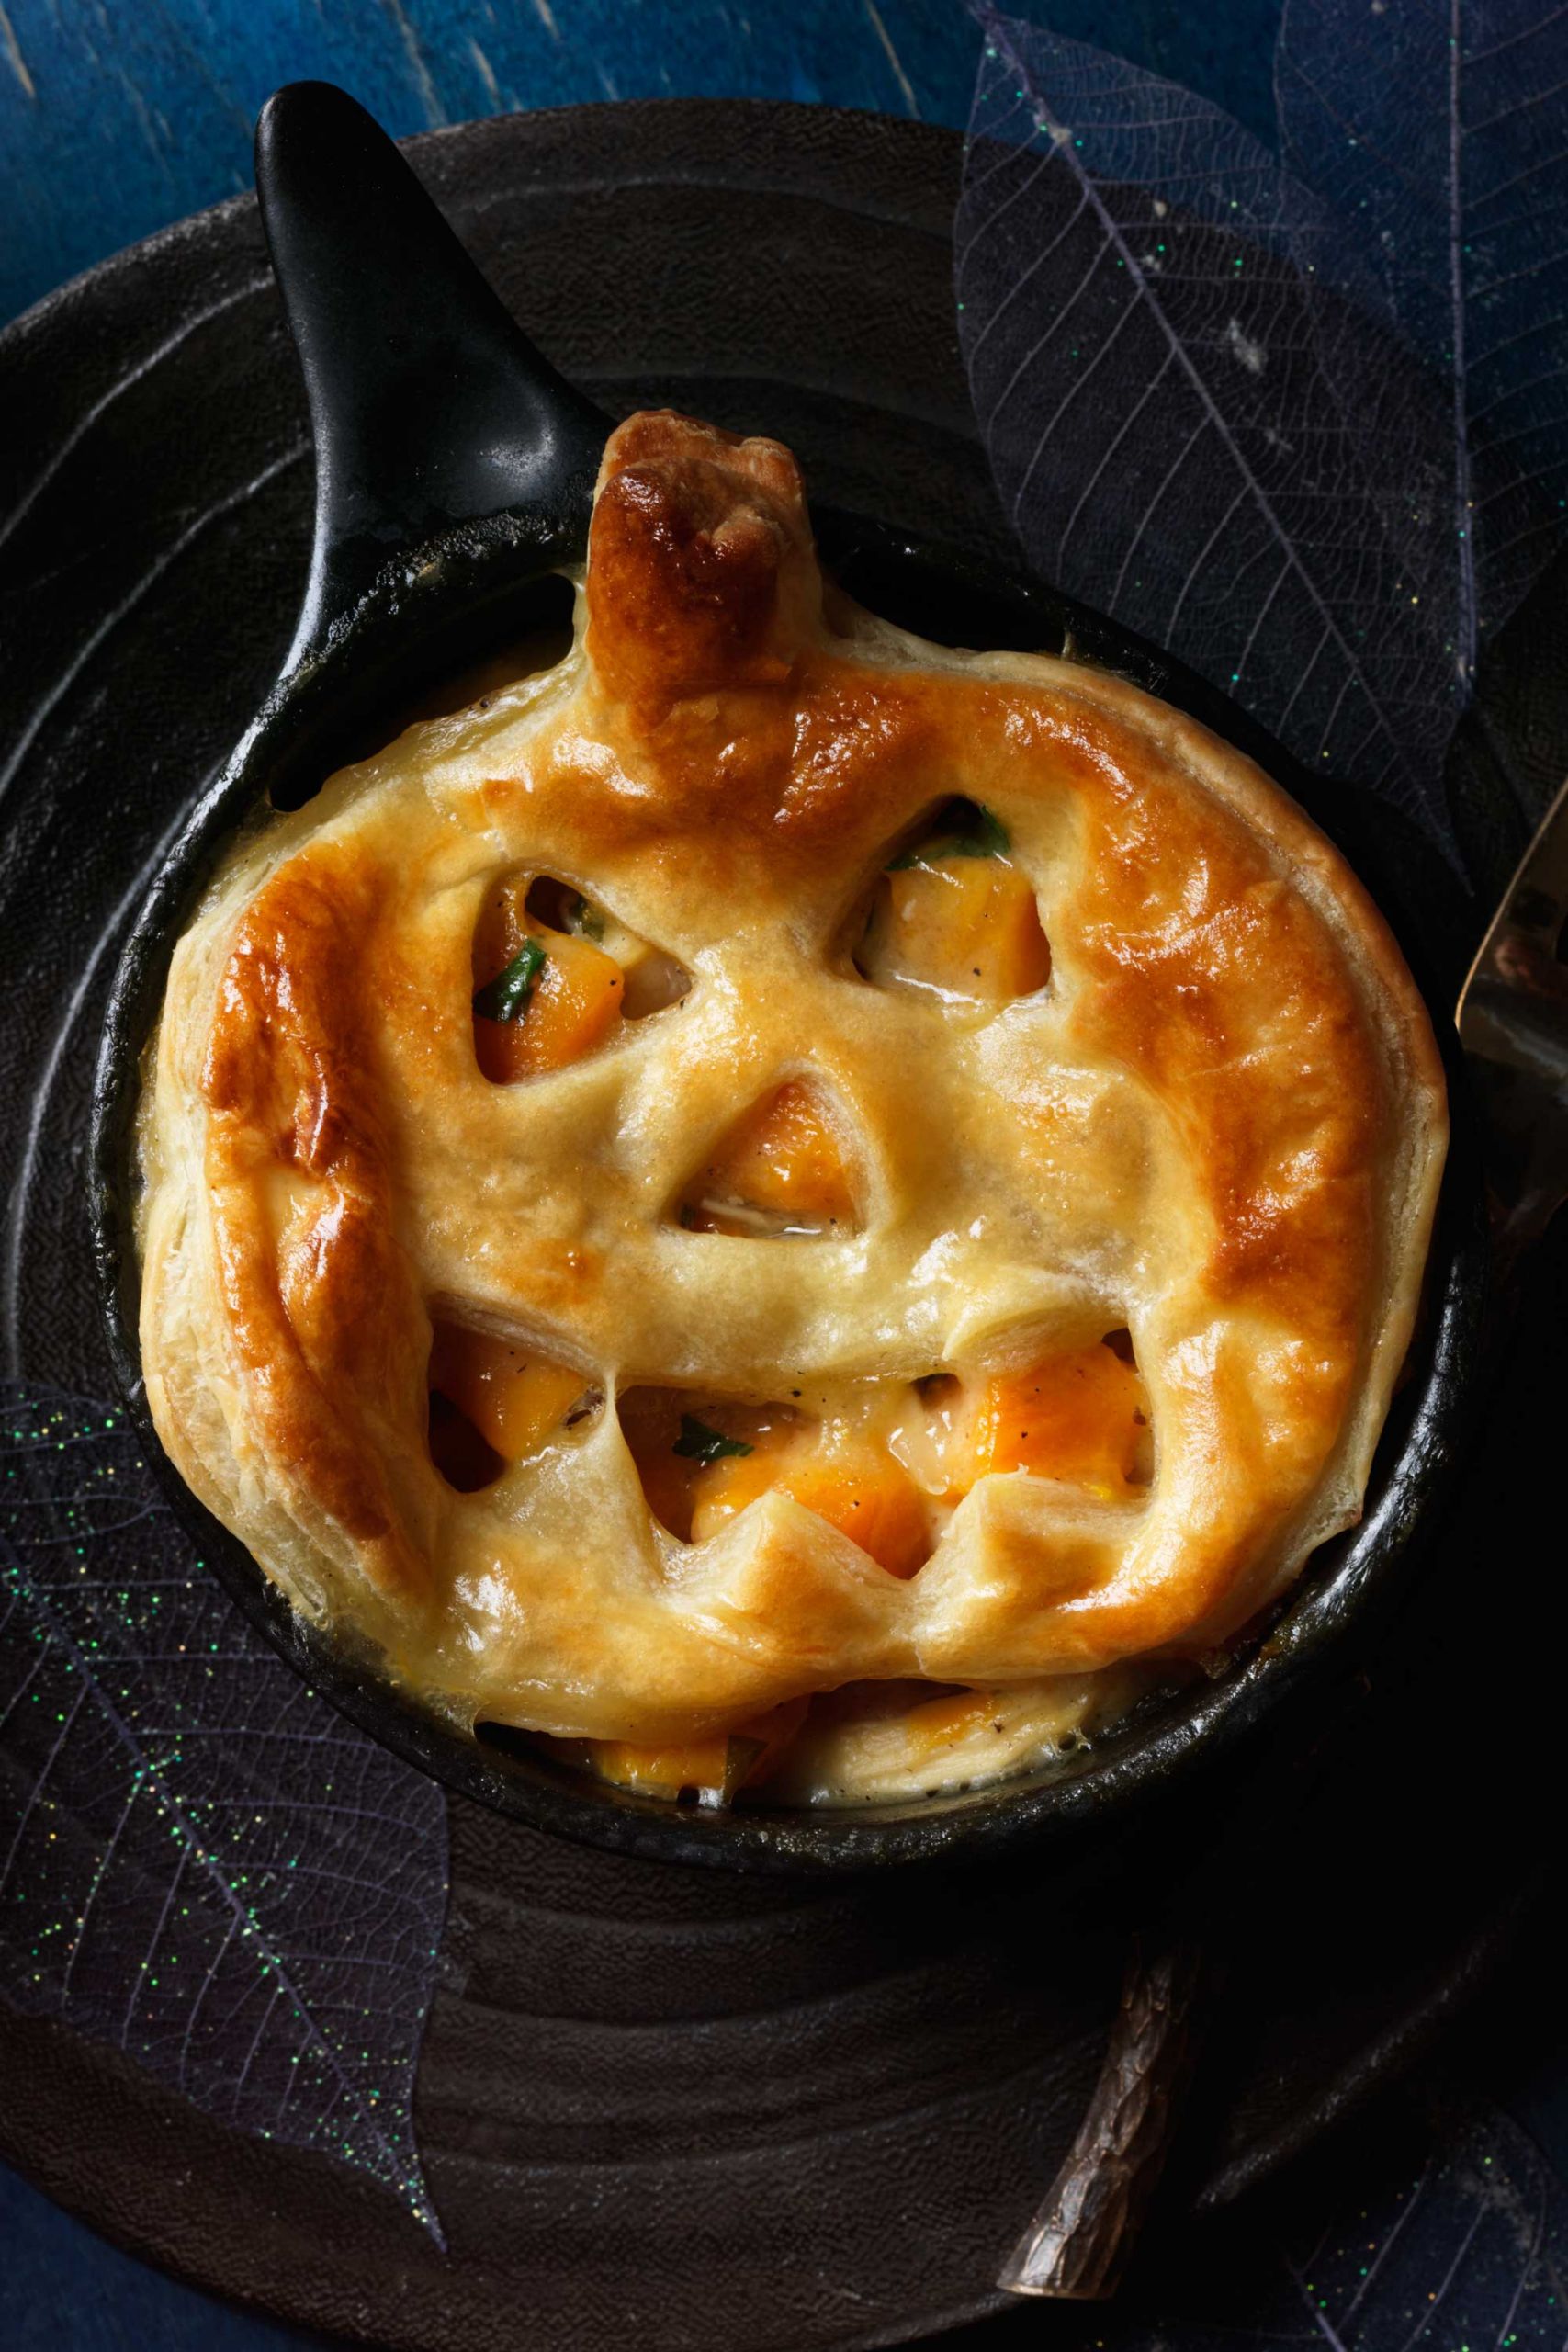 Halloween Dinner Recipes With Pictures
 20 Spooky Halloween Dinner Ideas Best Recipes for